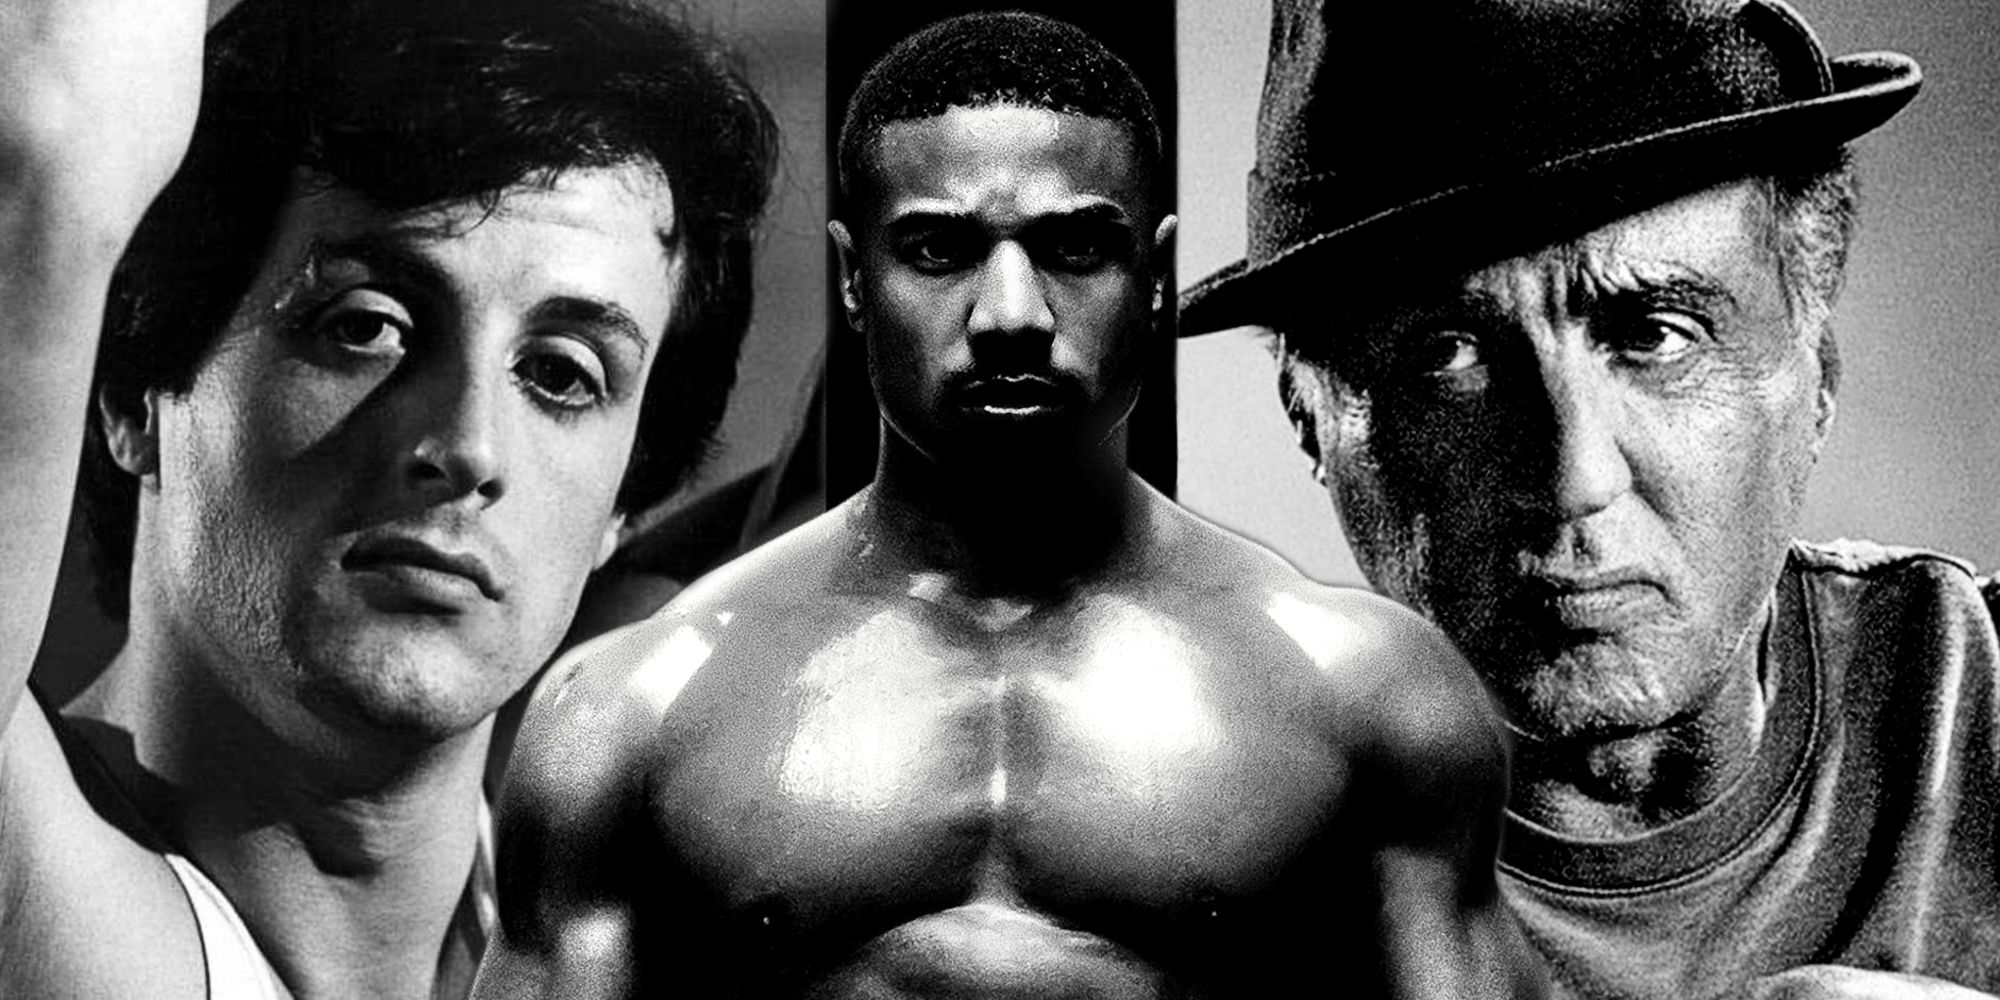 Young and Old Rocky Balboa in Creed II